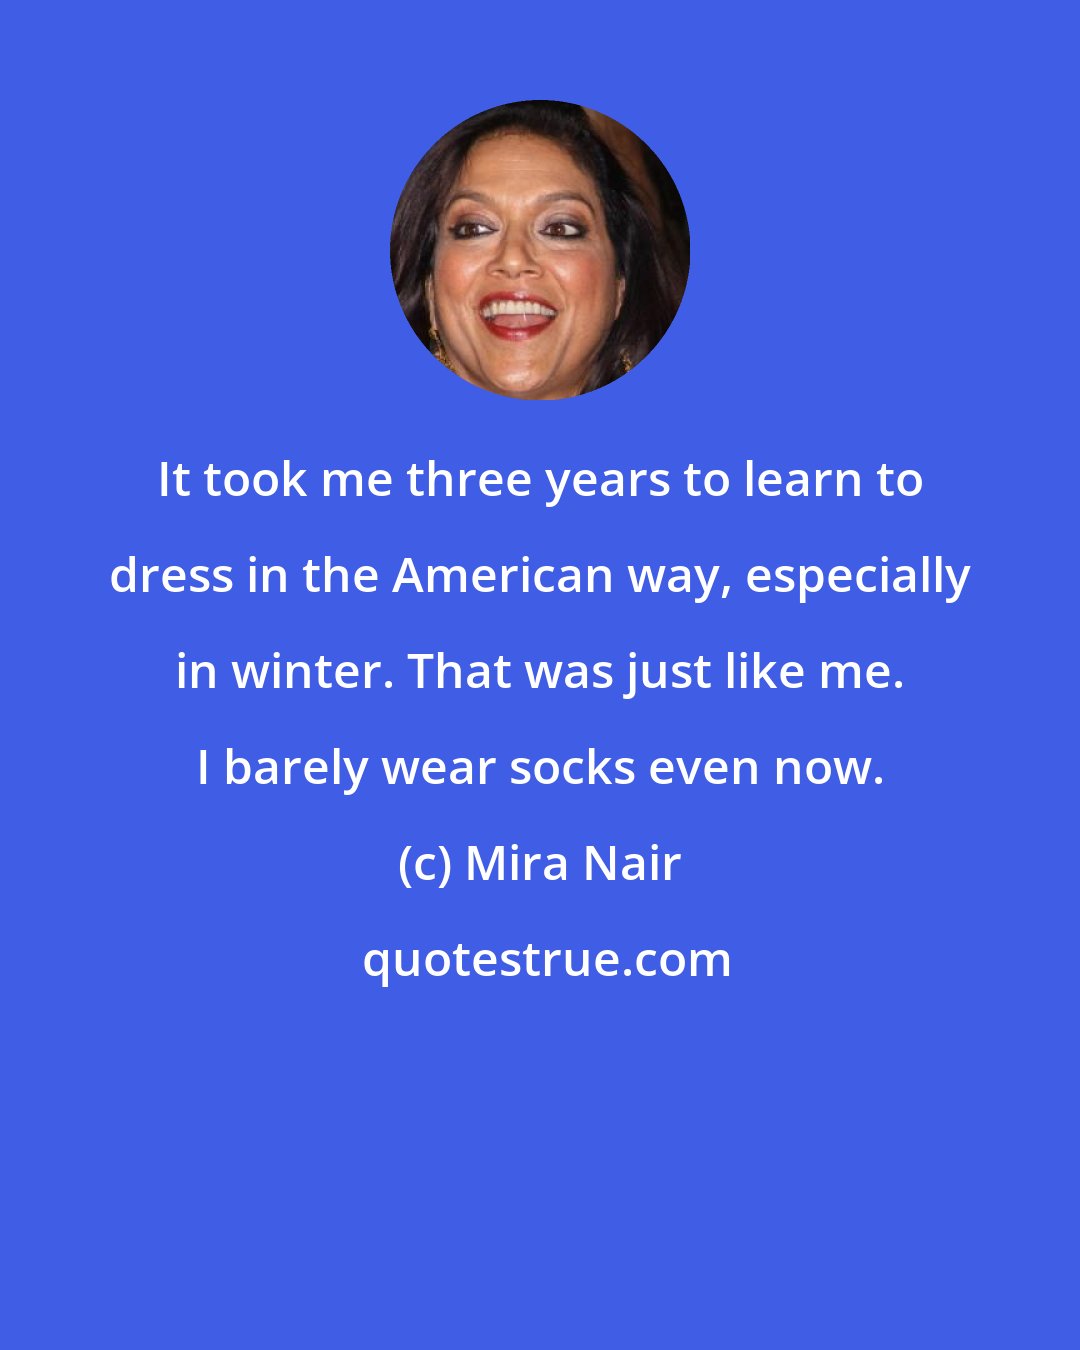 Mira Nair: It took me three years to learn to dress in the American way, especially in winter. That was just like me. I barely wear socks even now.